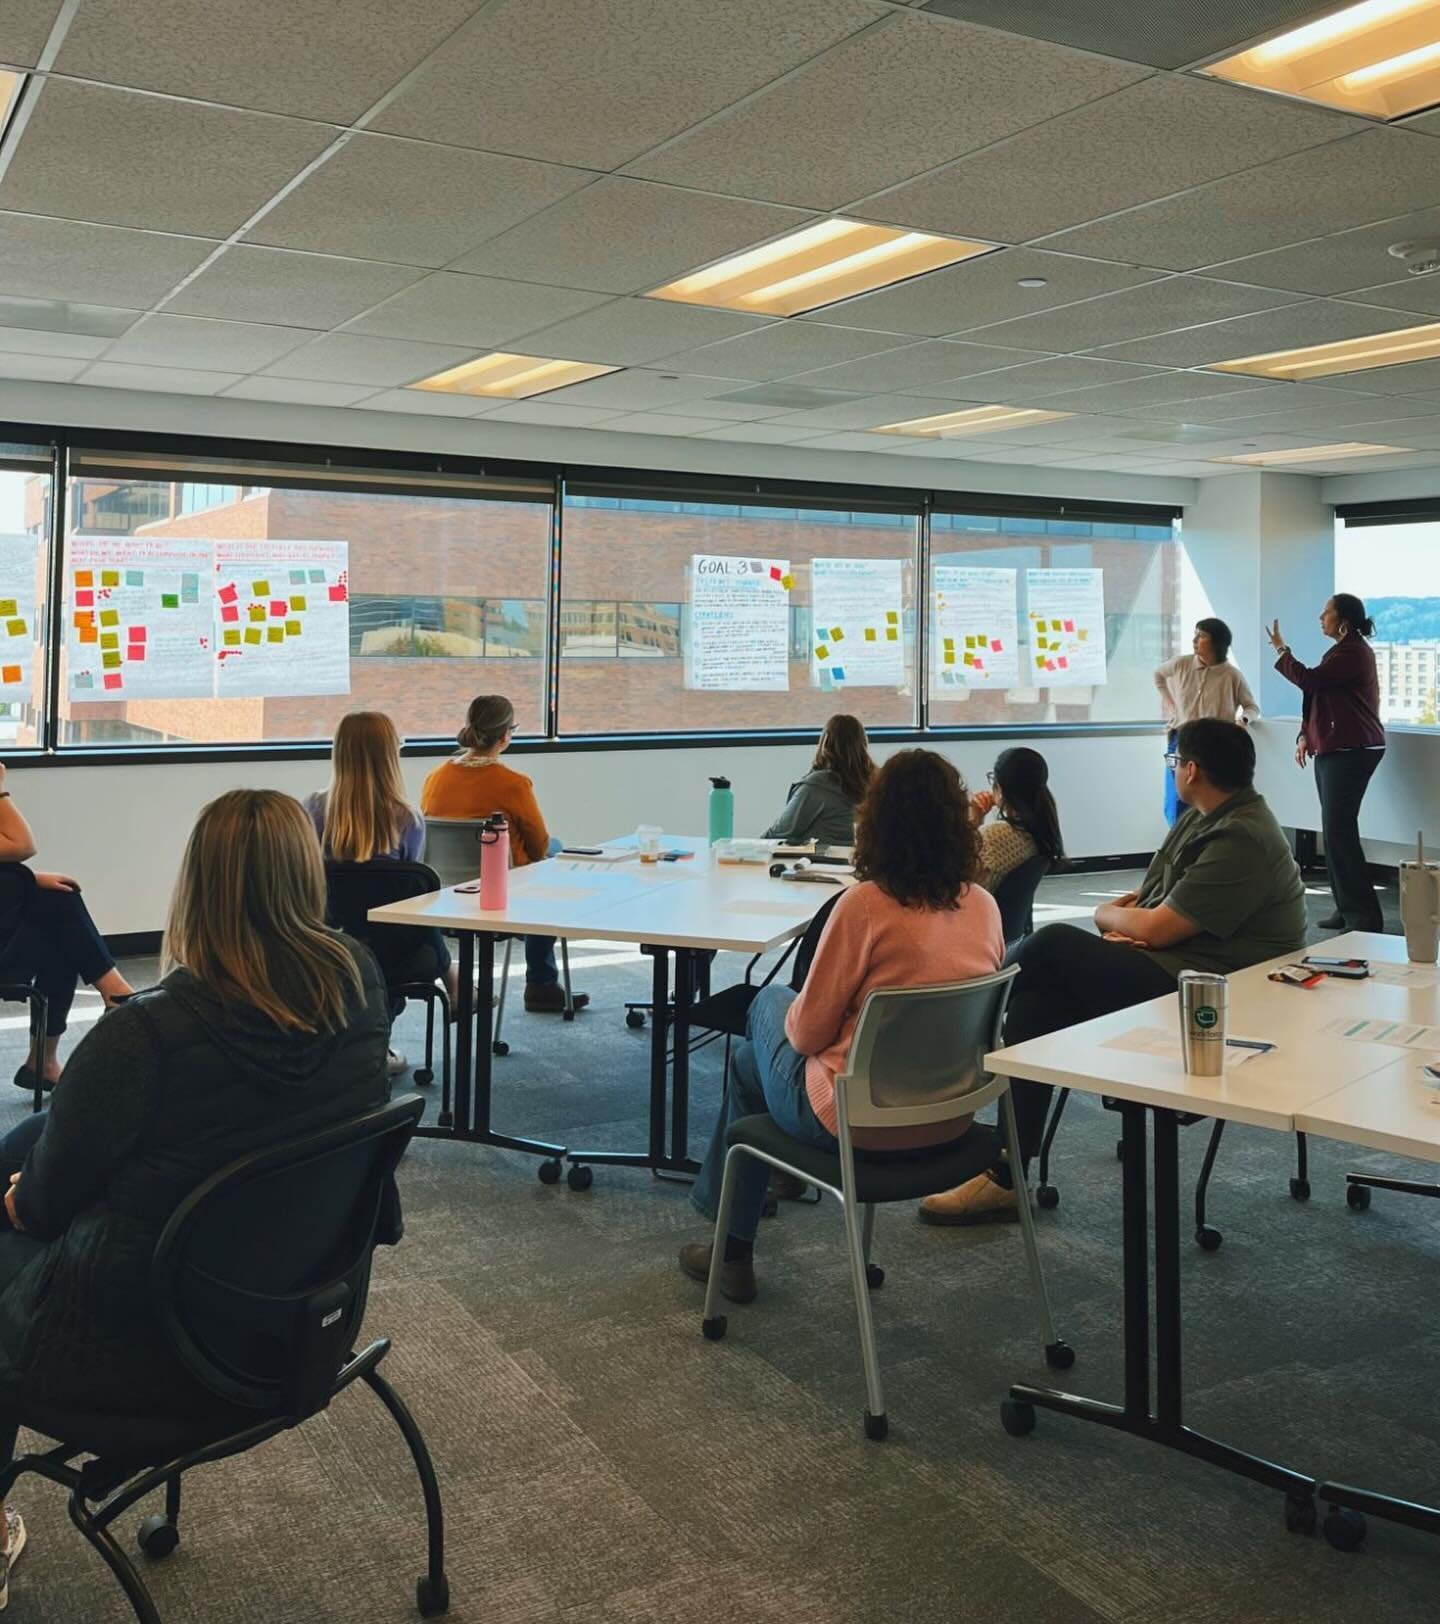 Envisioning future impact and aligning organizational strategy can be a tall order for a Monday morning &mdash; thanks to the Workforce Southwest Washington team for bringing their big thinking and expert insights to the table ready to kick off strat